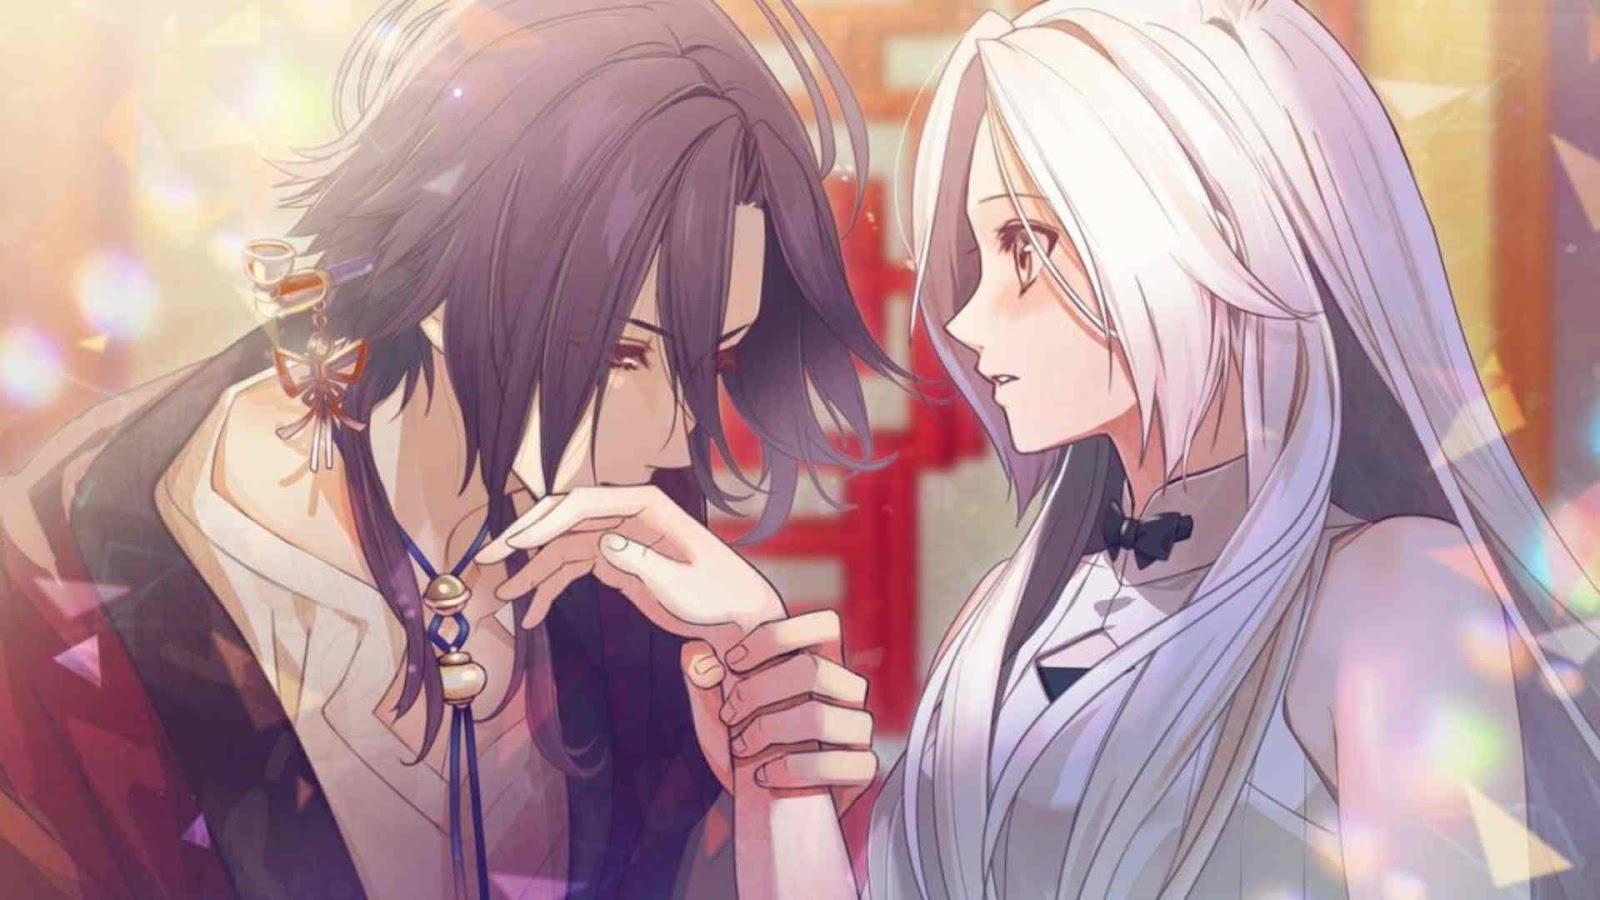 10 Otome Games That Deserve Anime Adaptations